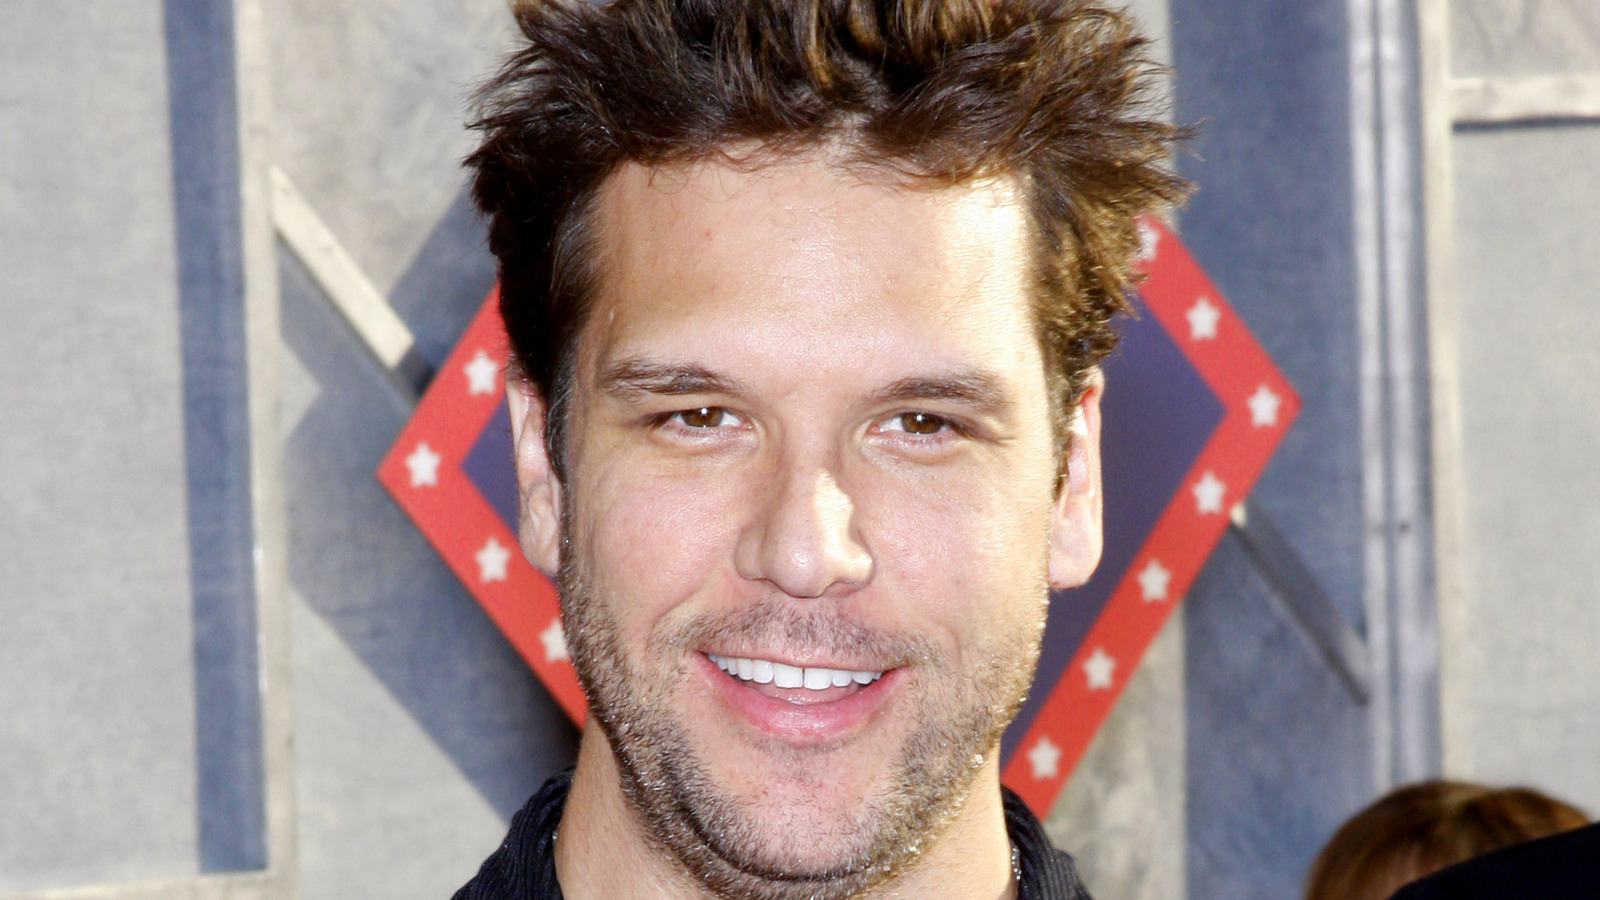 Dane Cook, who I assume made some deal with the Devil for his early career success, that has since bitten him in the behind. No idea why people thought he was going to become a leading man in Hollywood. -Sometimes_I_Digress